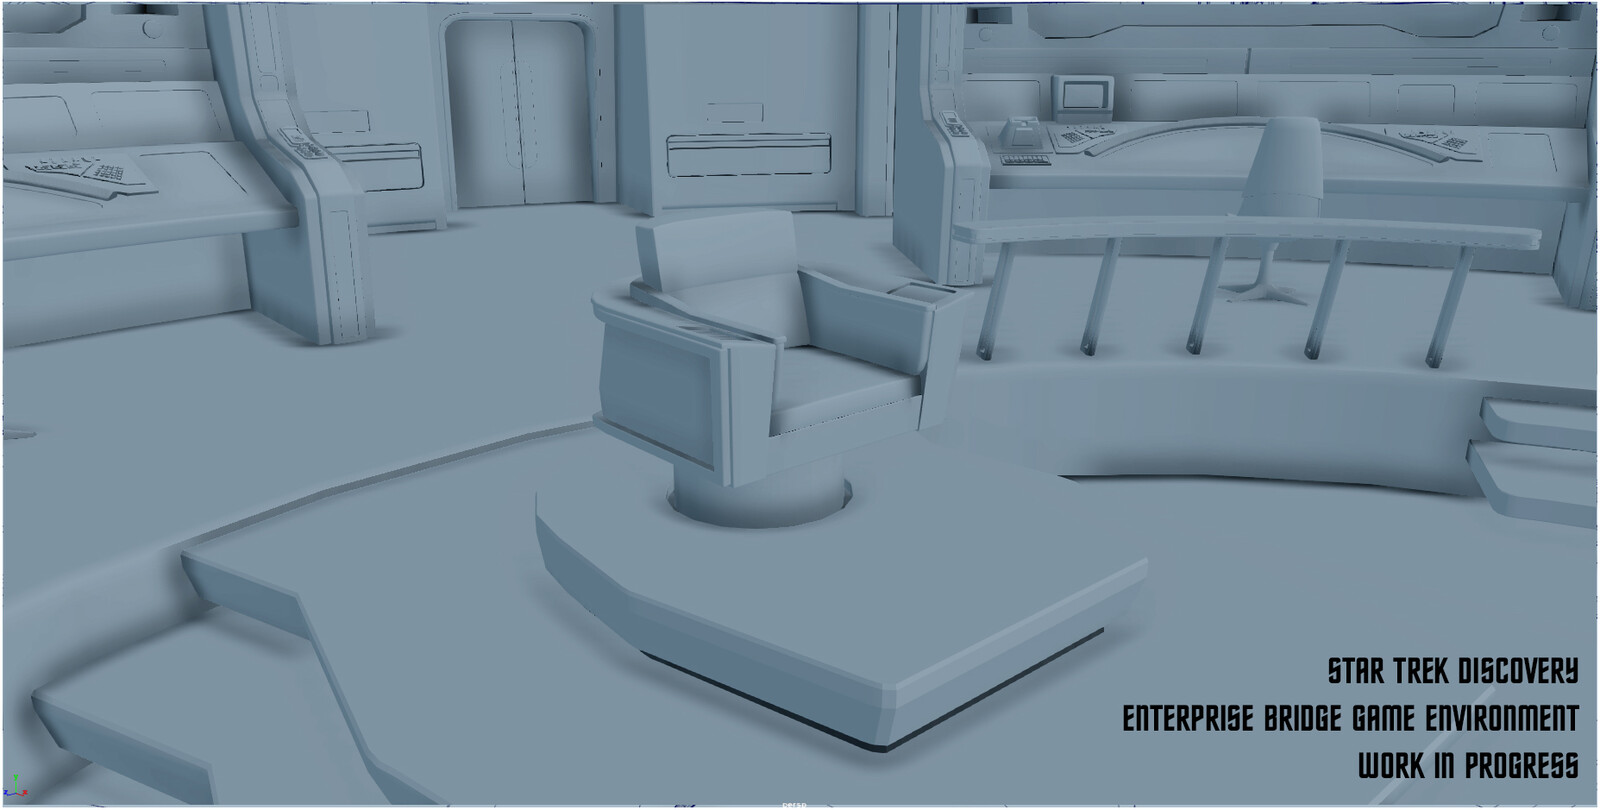 I am currently recreating the re-imagined USS NCC-1701Enterprise bridge captained by Christopher Pike from Star Trek Discovery as a real-time environment. (Hence the triangles, CG friends!) I am currently working on texturing and lighting the environment 